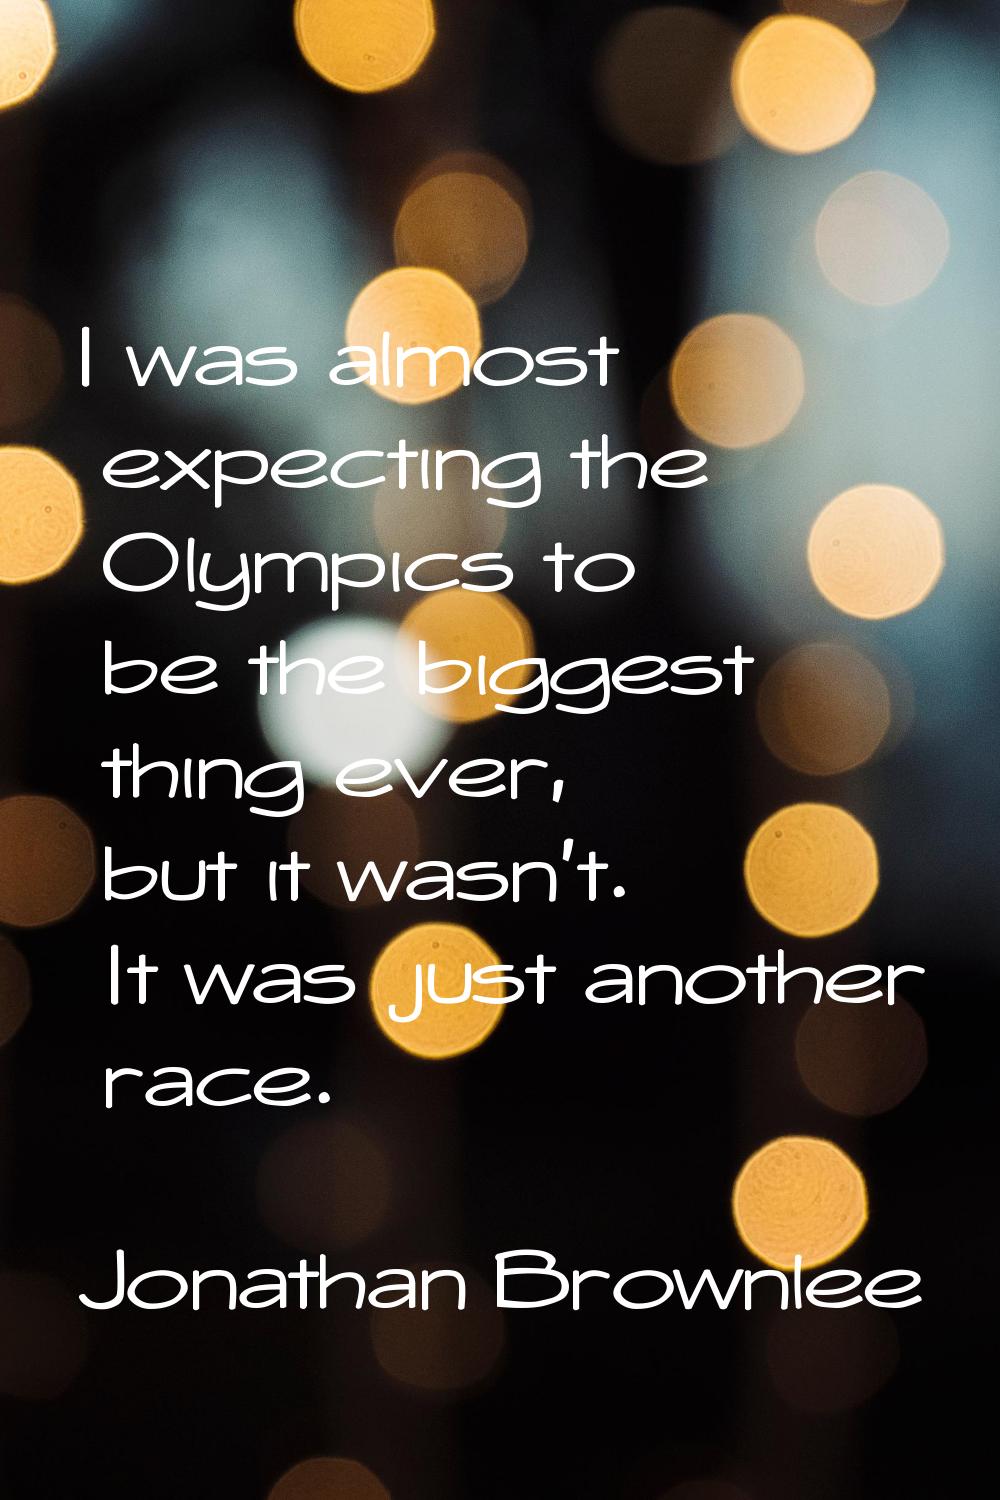 I was almost expecting the Olympics to be the biggest thing ever, but it wasn't. It was just anothe